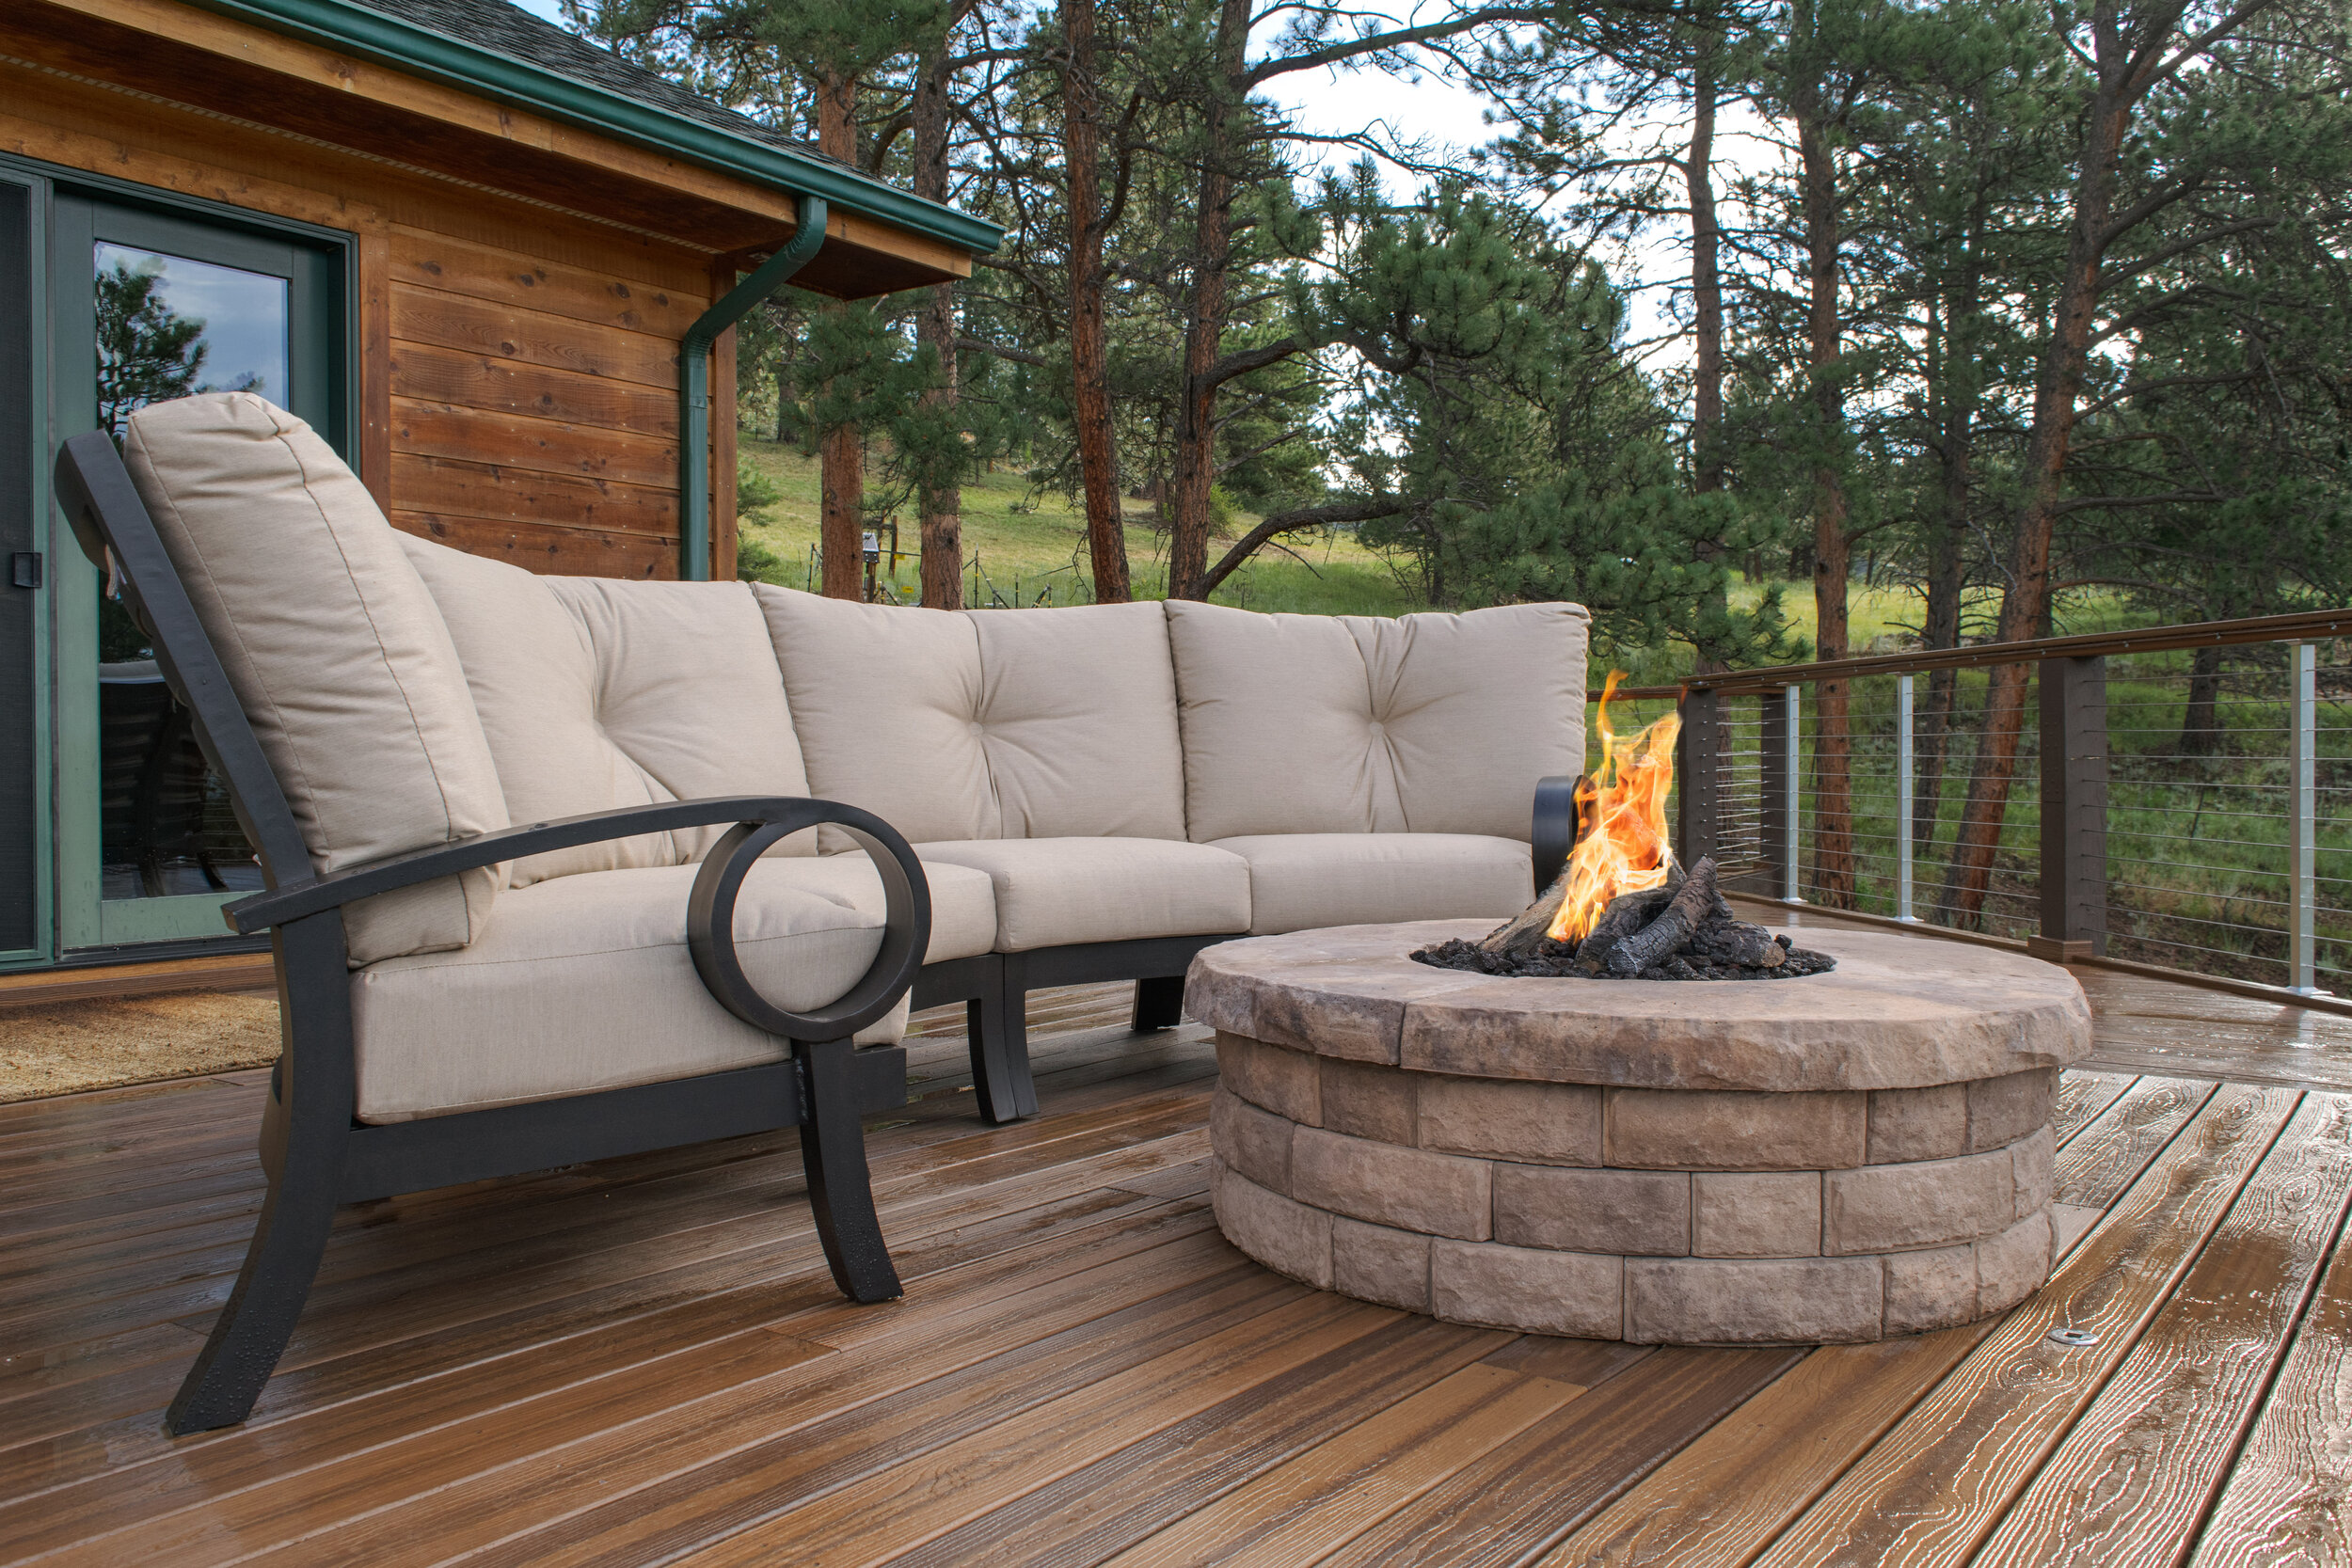 Outdoor Space With A Gas Fire Pit, Fire Pit And Deck